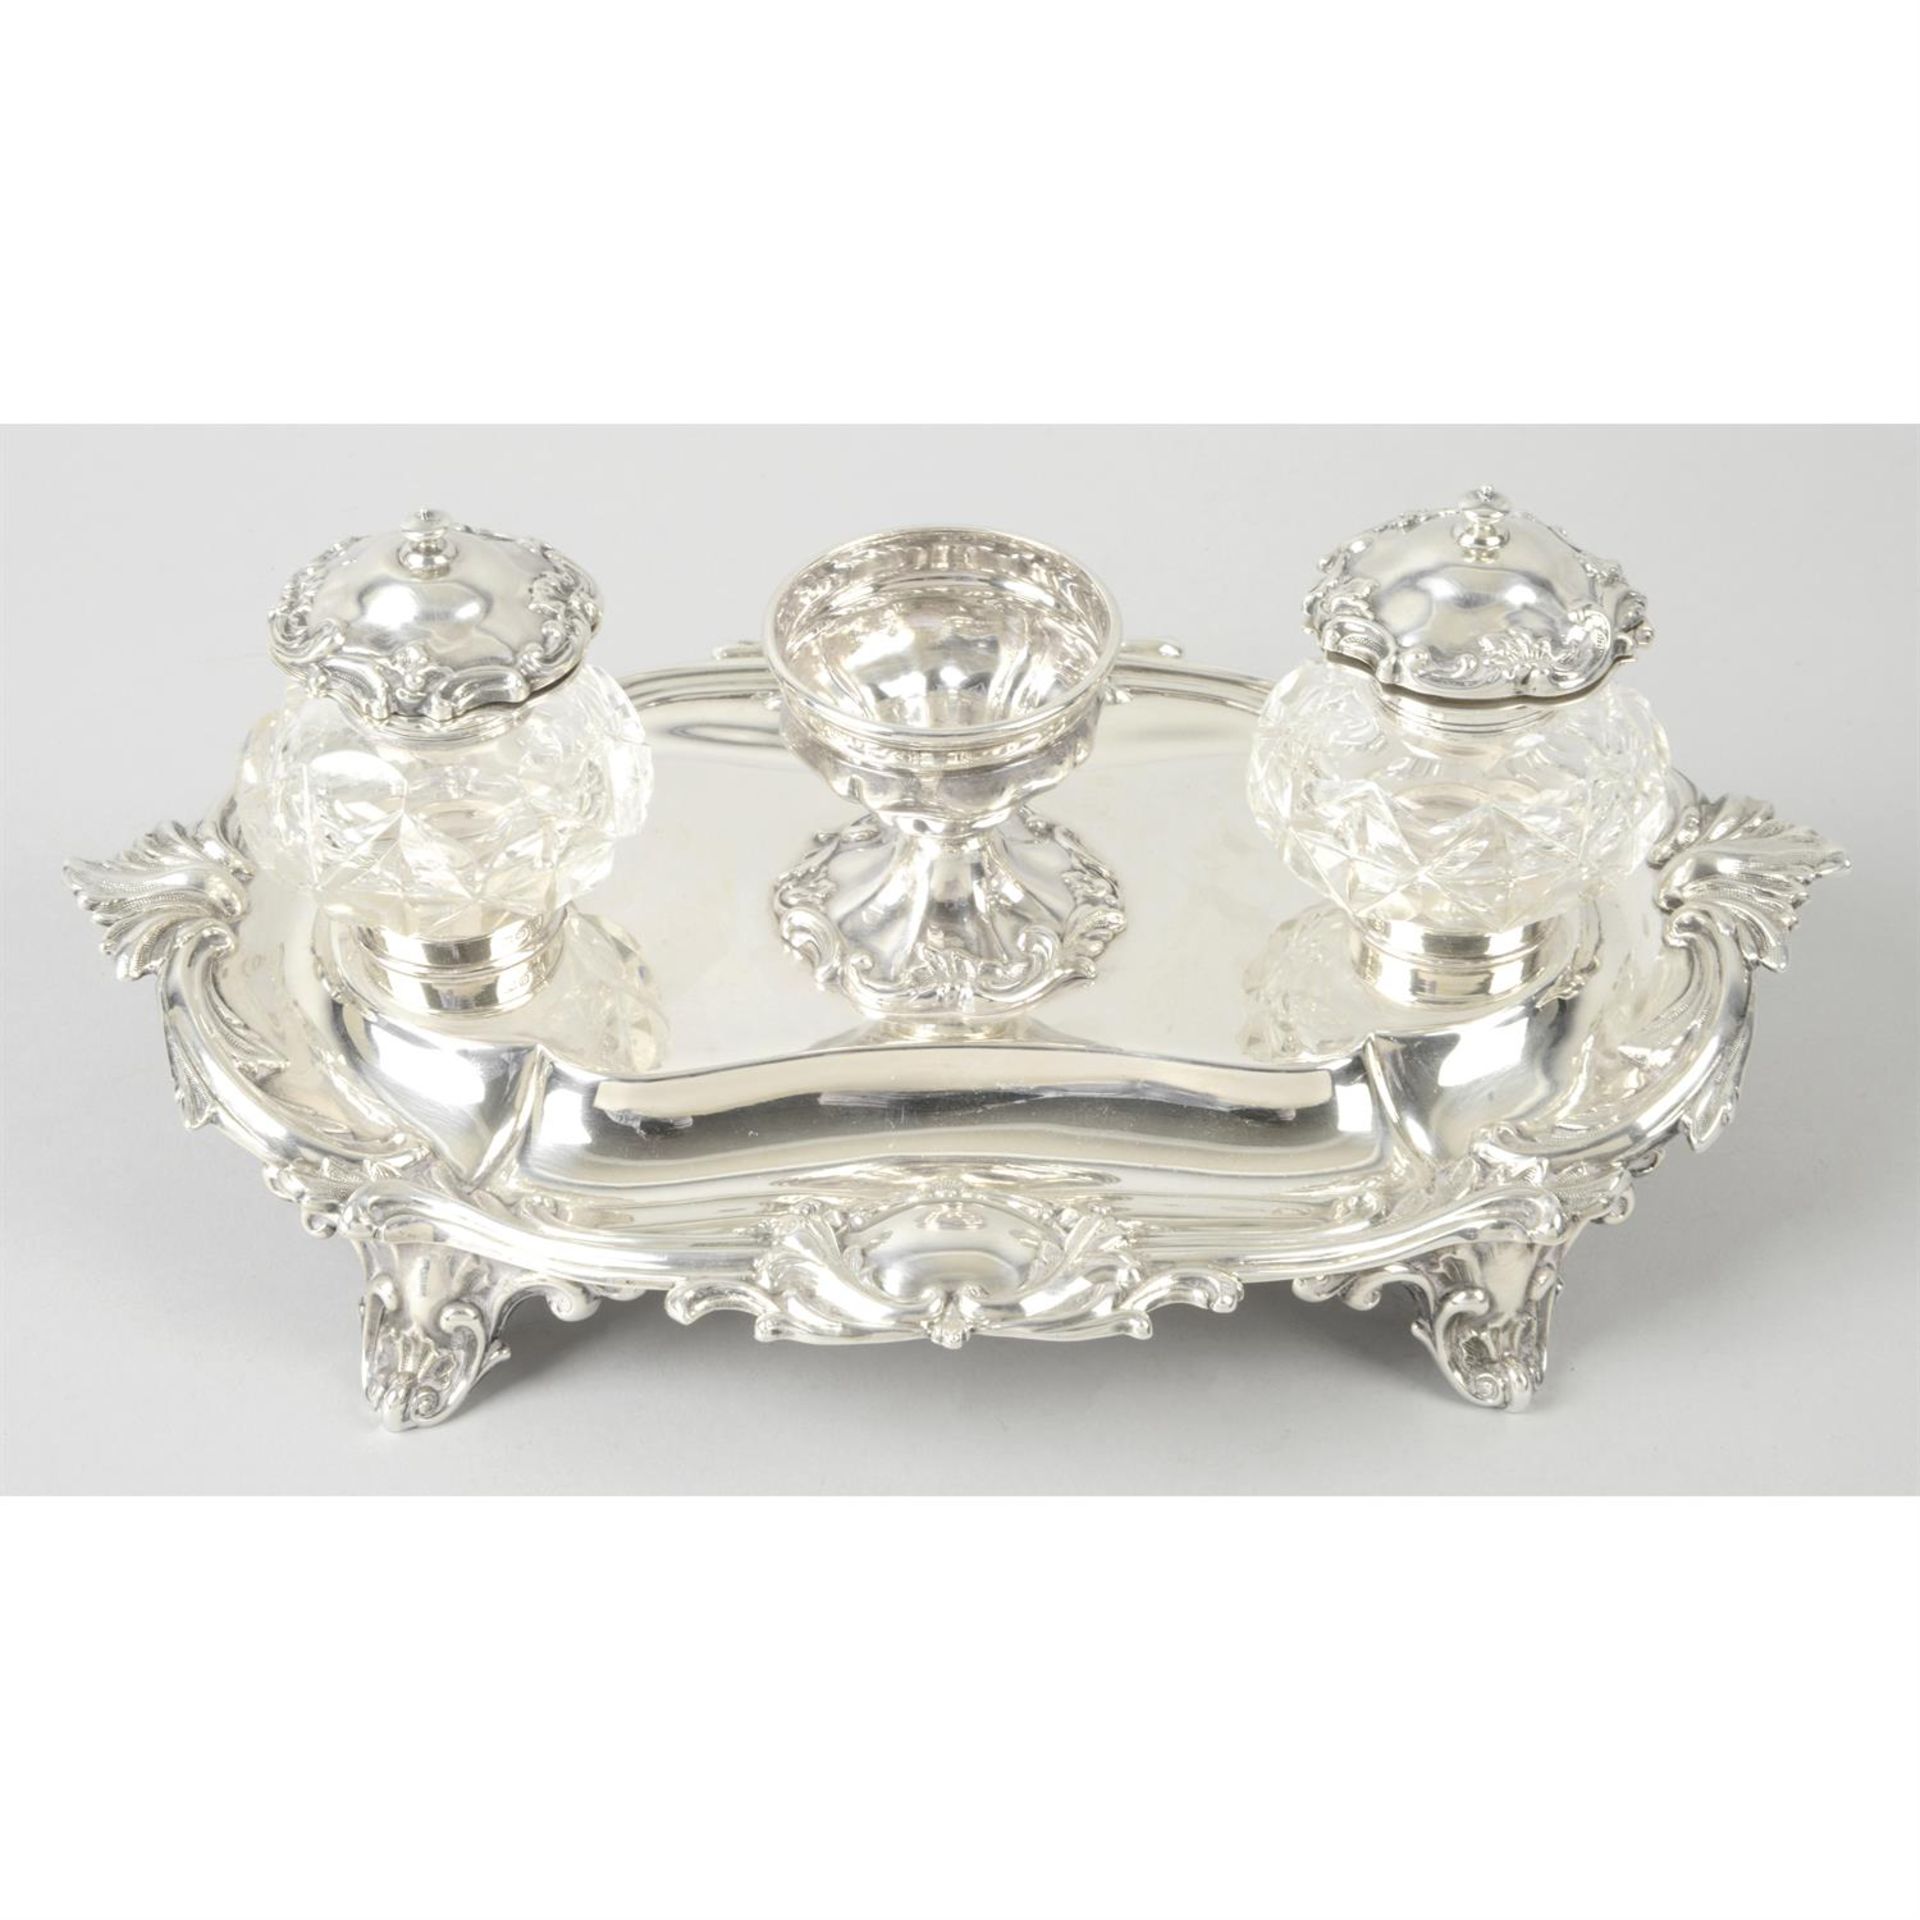 A mid-Victorian silver inkstand.